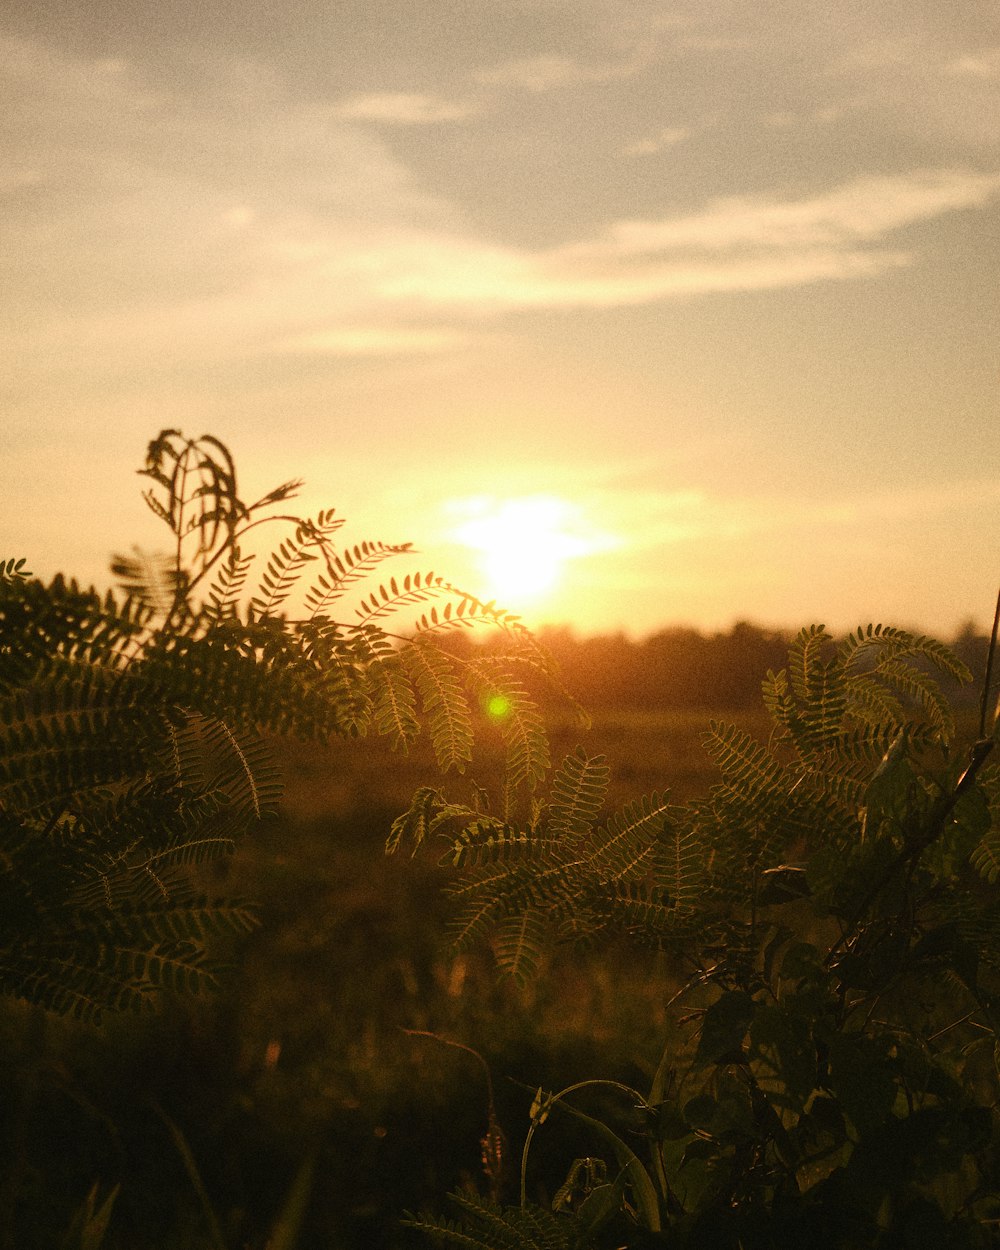 the sun is setting over a grassy field